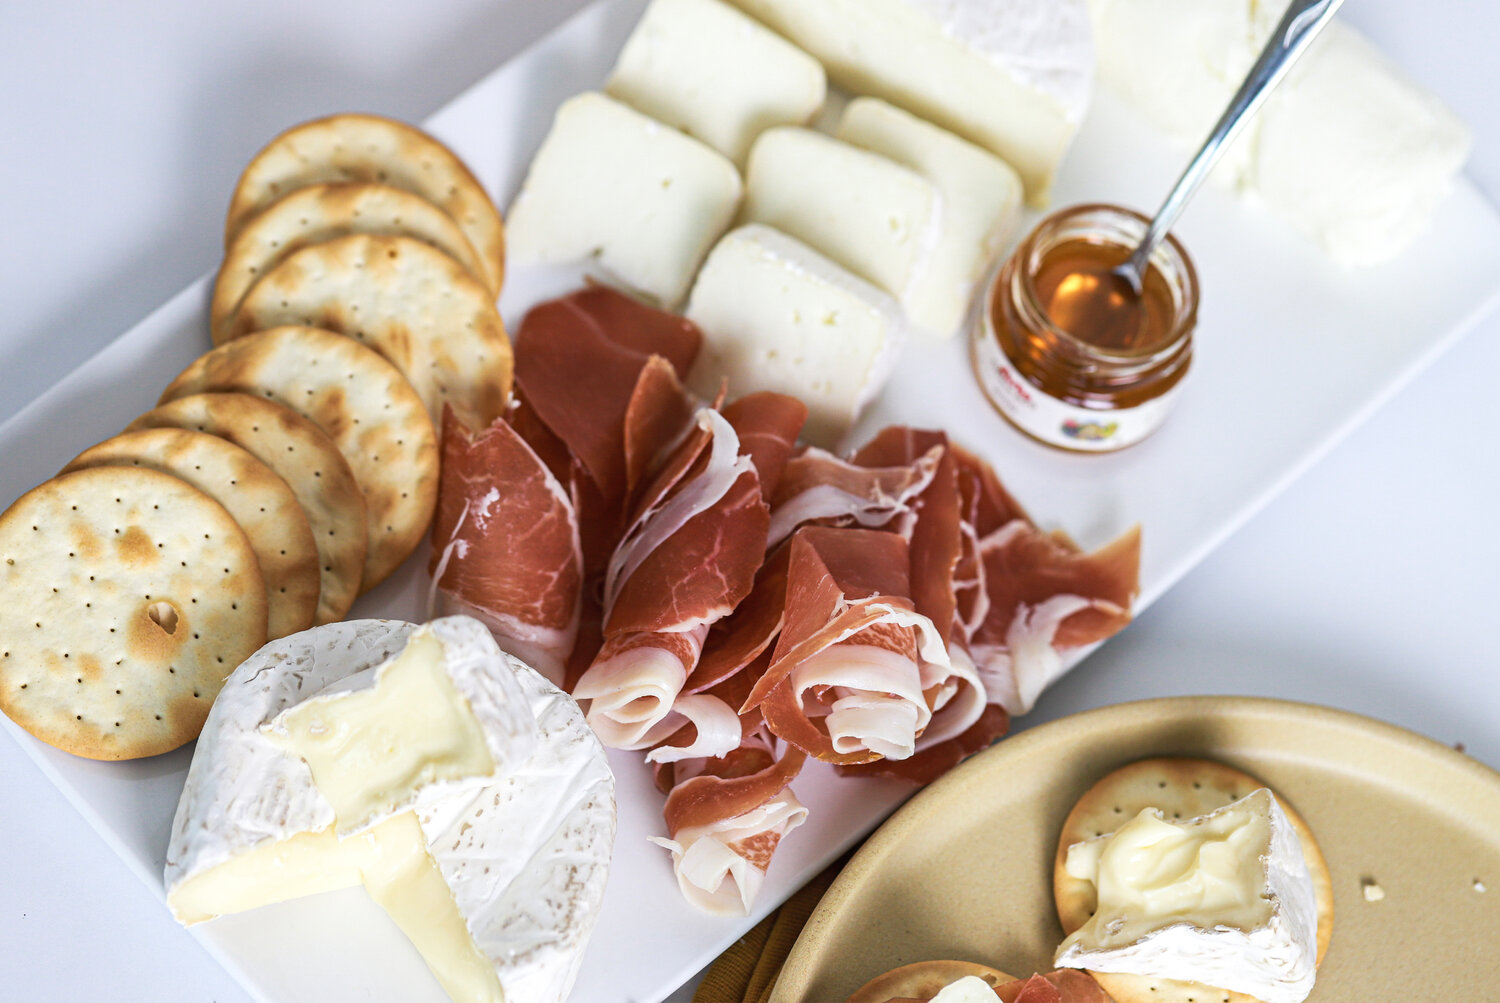 East Side Cheese & Provisions will stock charcuterie items for all tastes